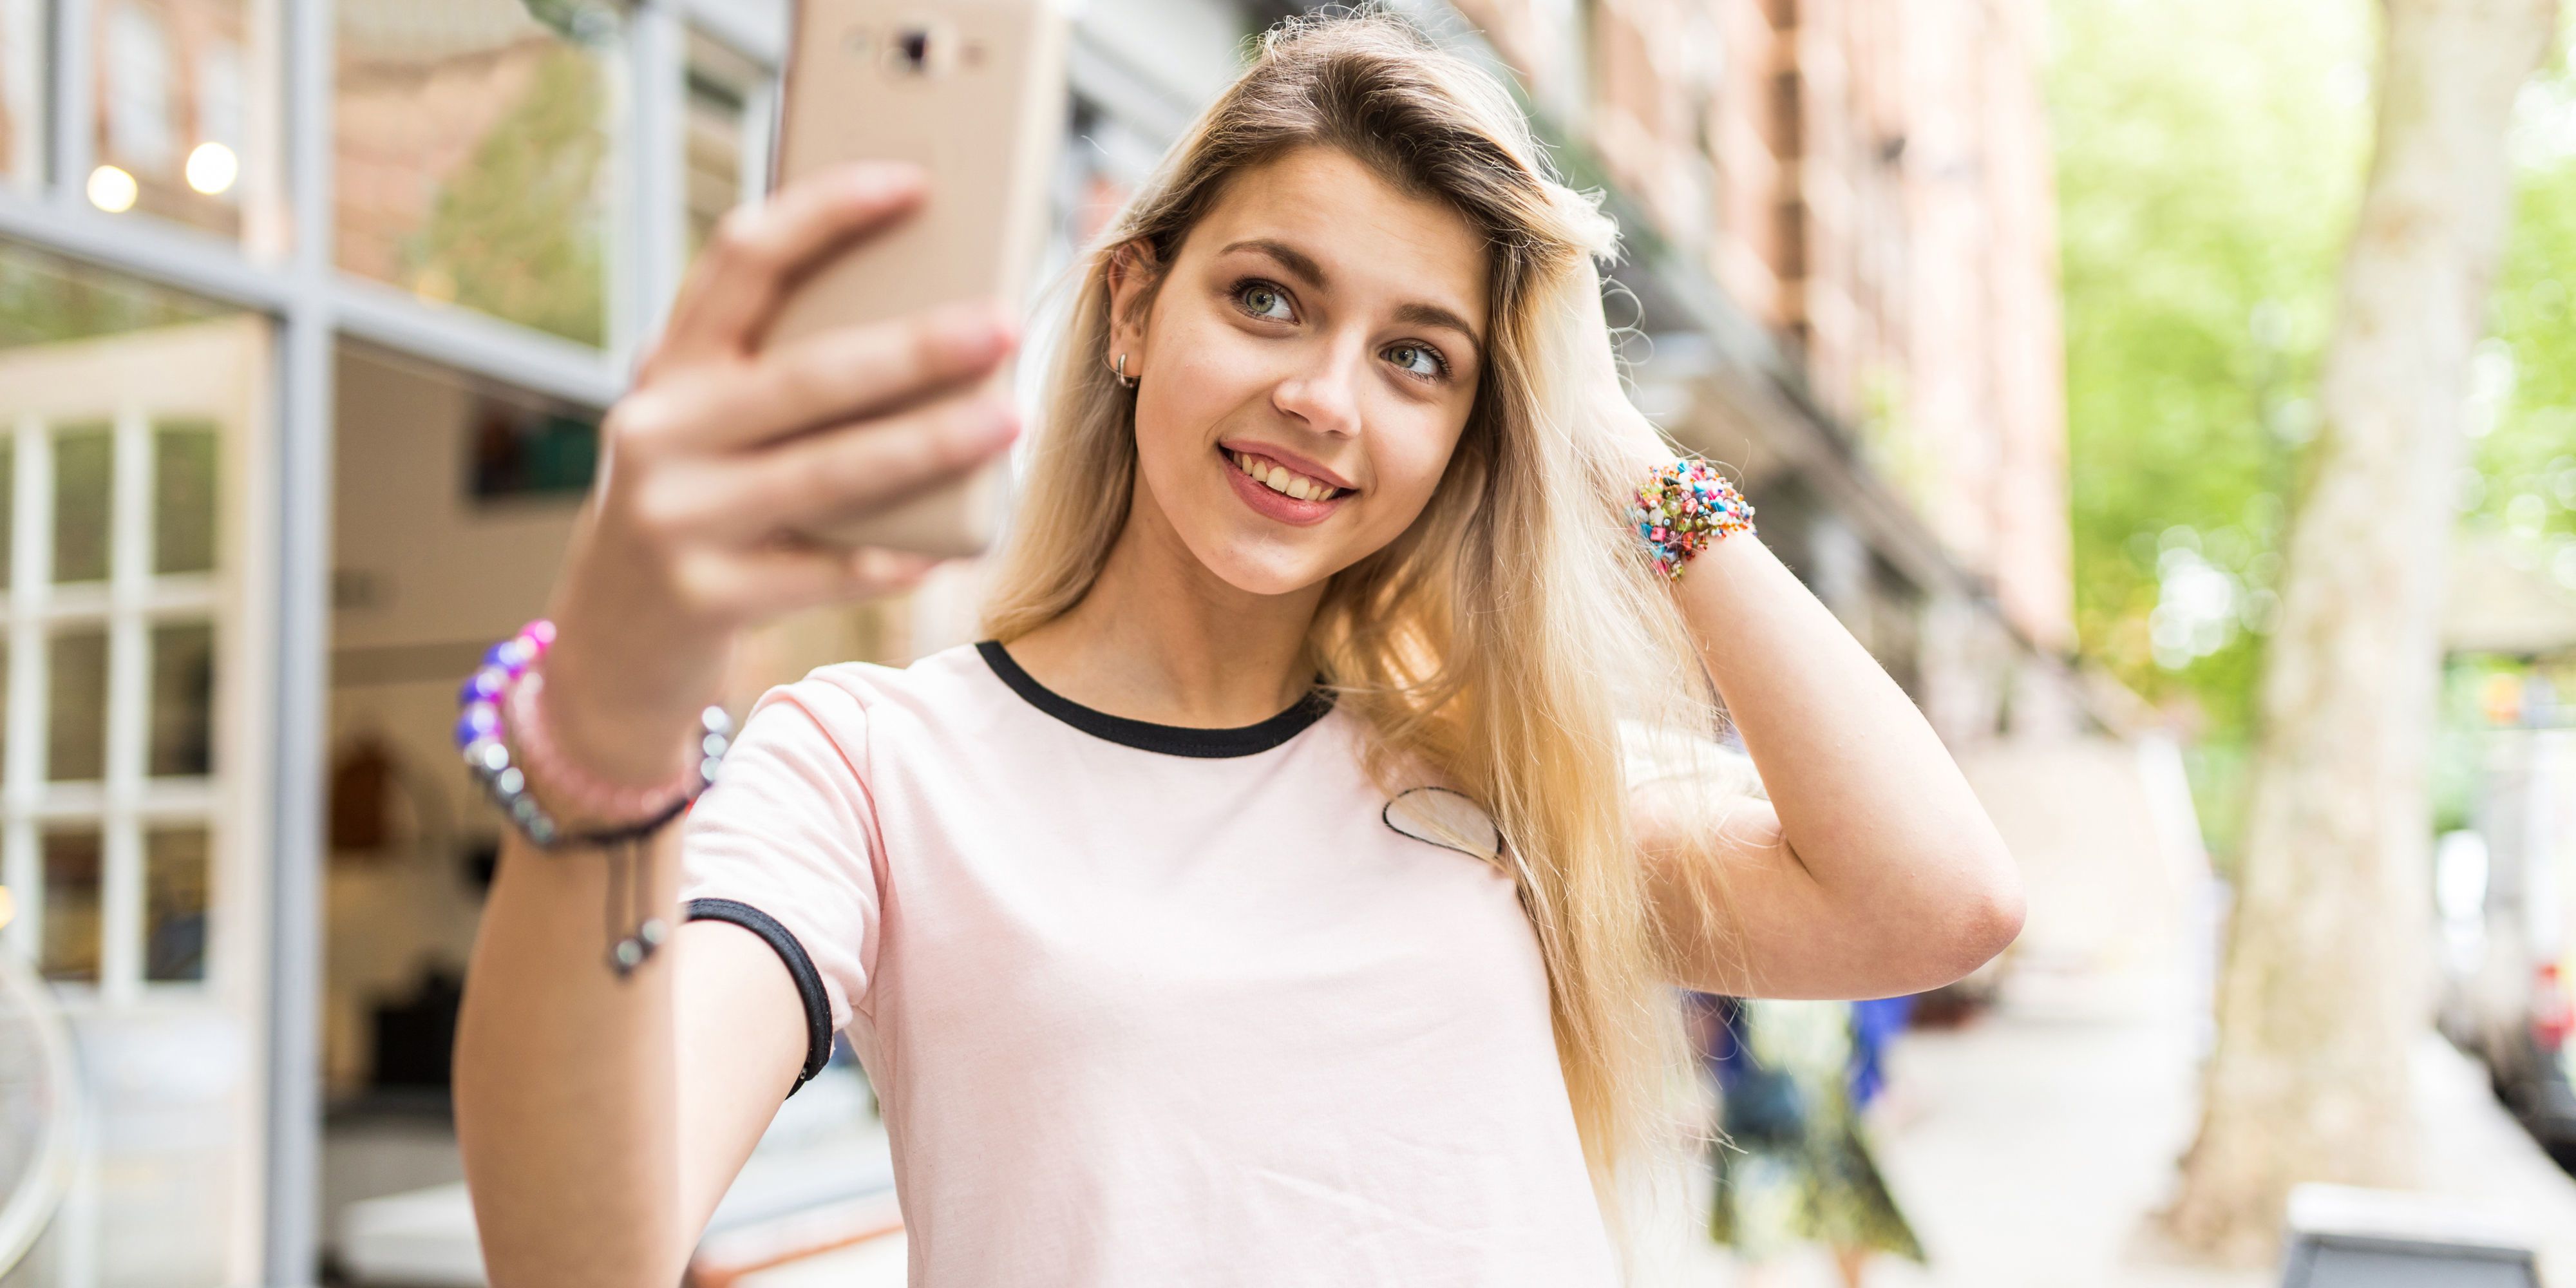 Taking too many selfies could be bad for your health, according to research image